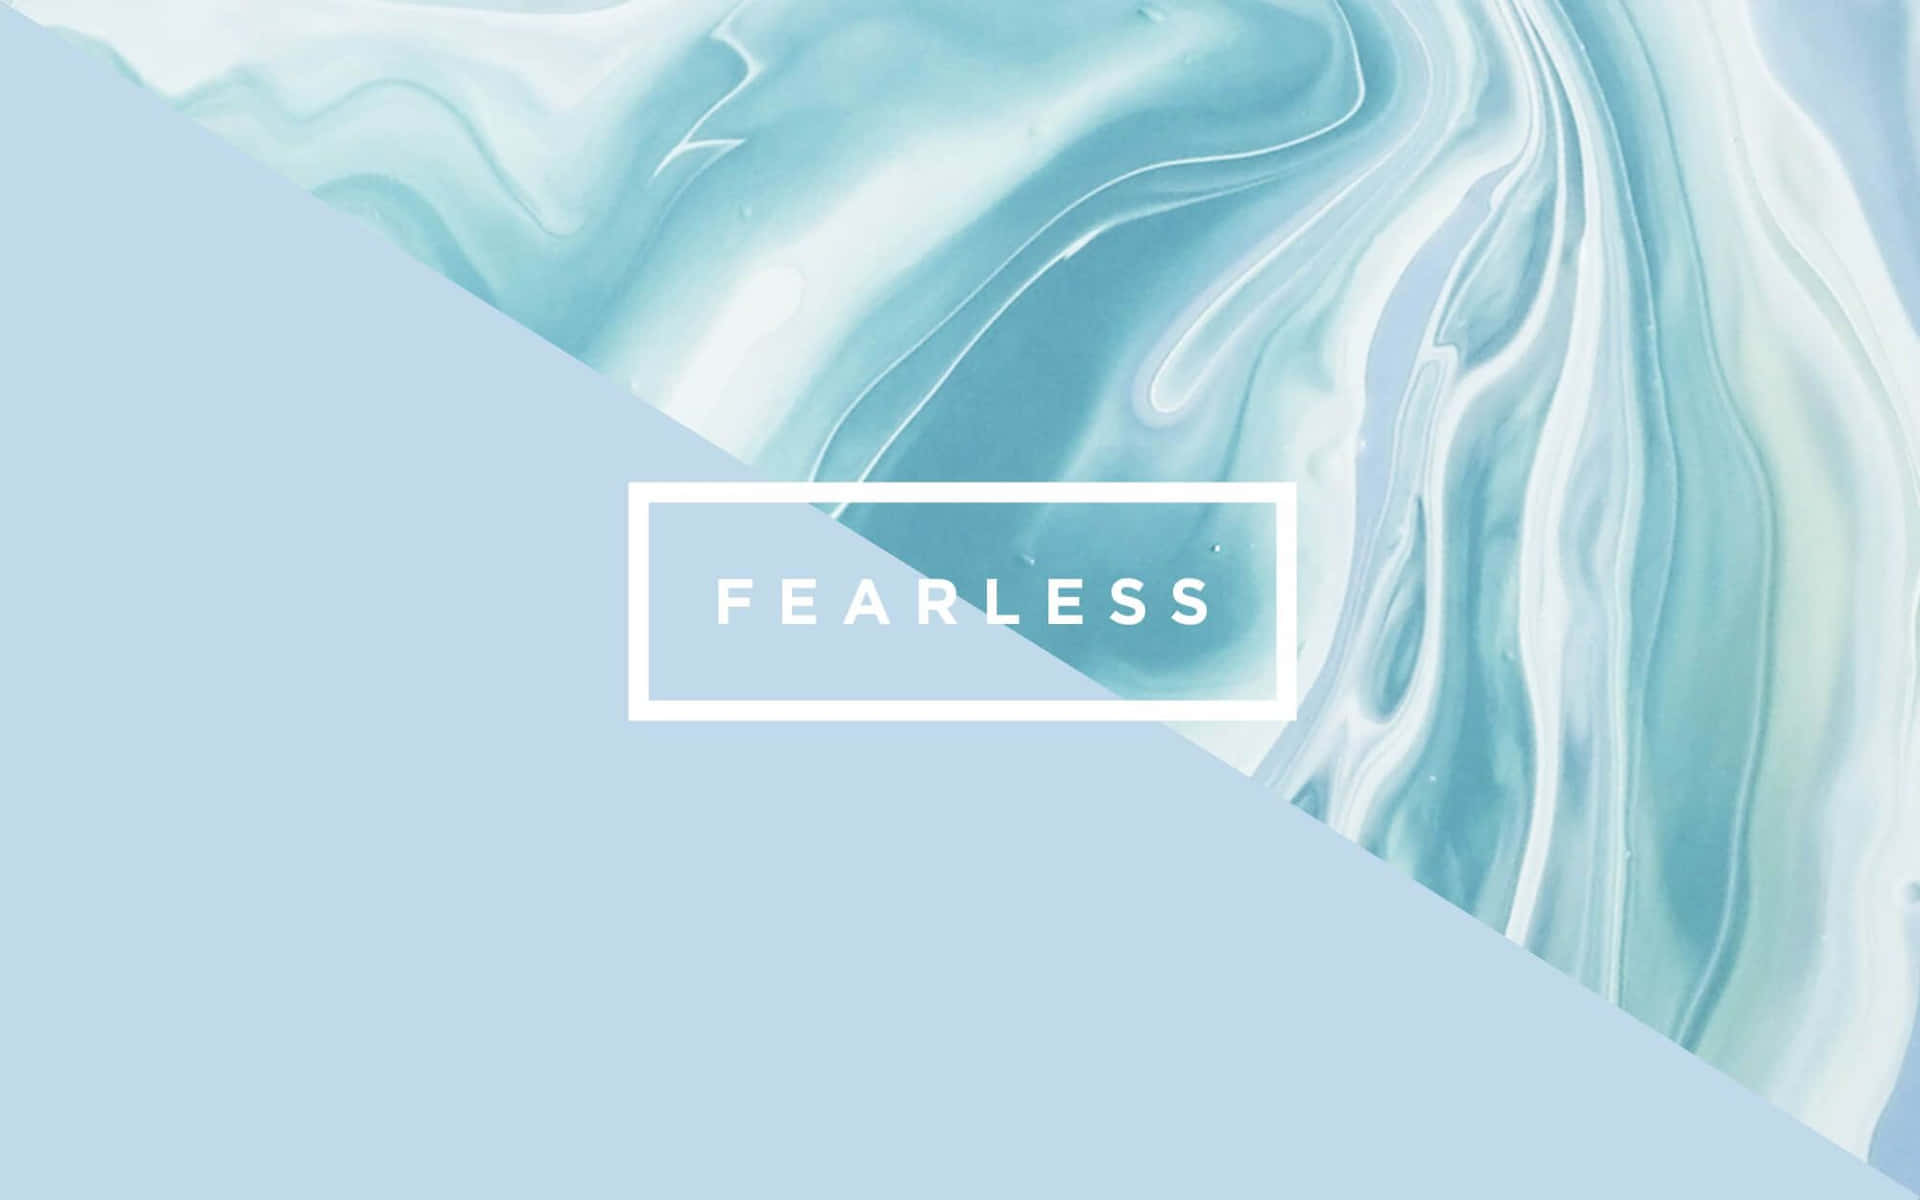 Fearless - A Blue And White Marble Background Wallpaper